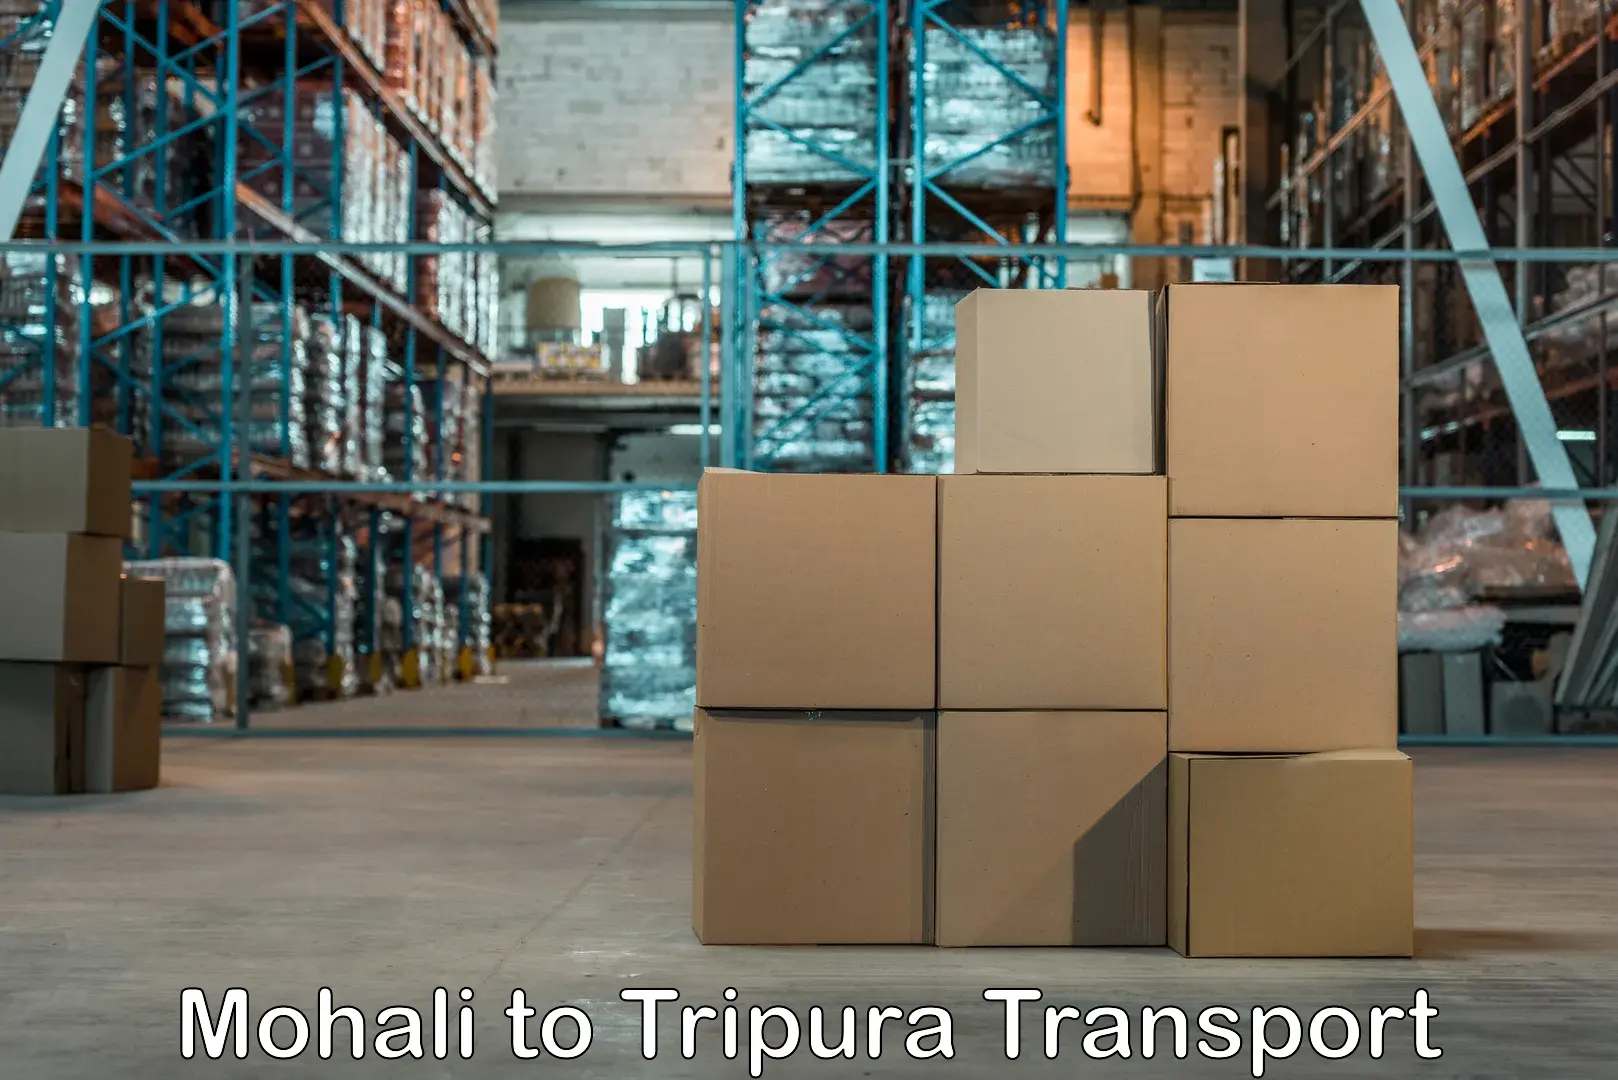 Express transport services Mohali to Udaipur Tripura